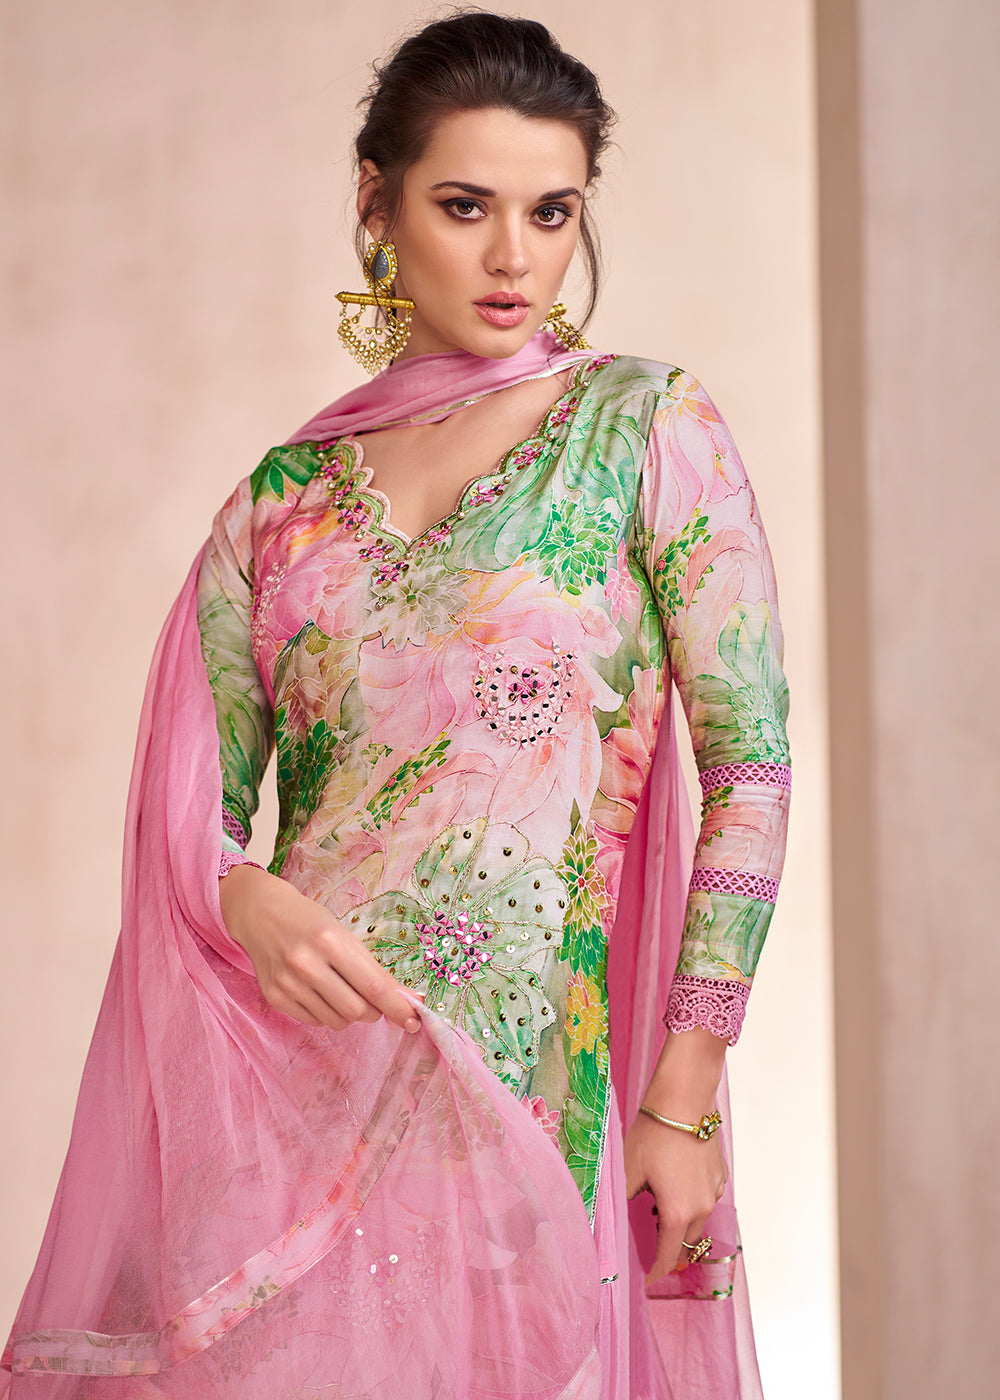 Buy Now Rose Pink Pure Muslin Embroidered Lehenga Skirt Suit Online in USA, UK, Canada, Germany, Australia & Worldwide at Empress Clothing. 